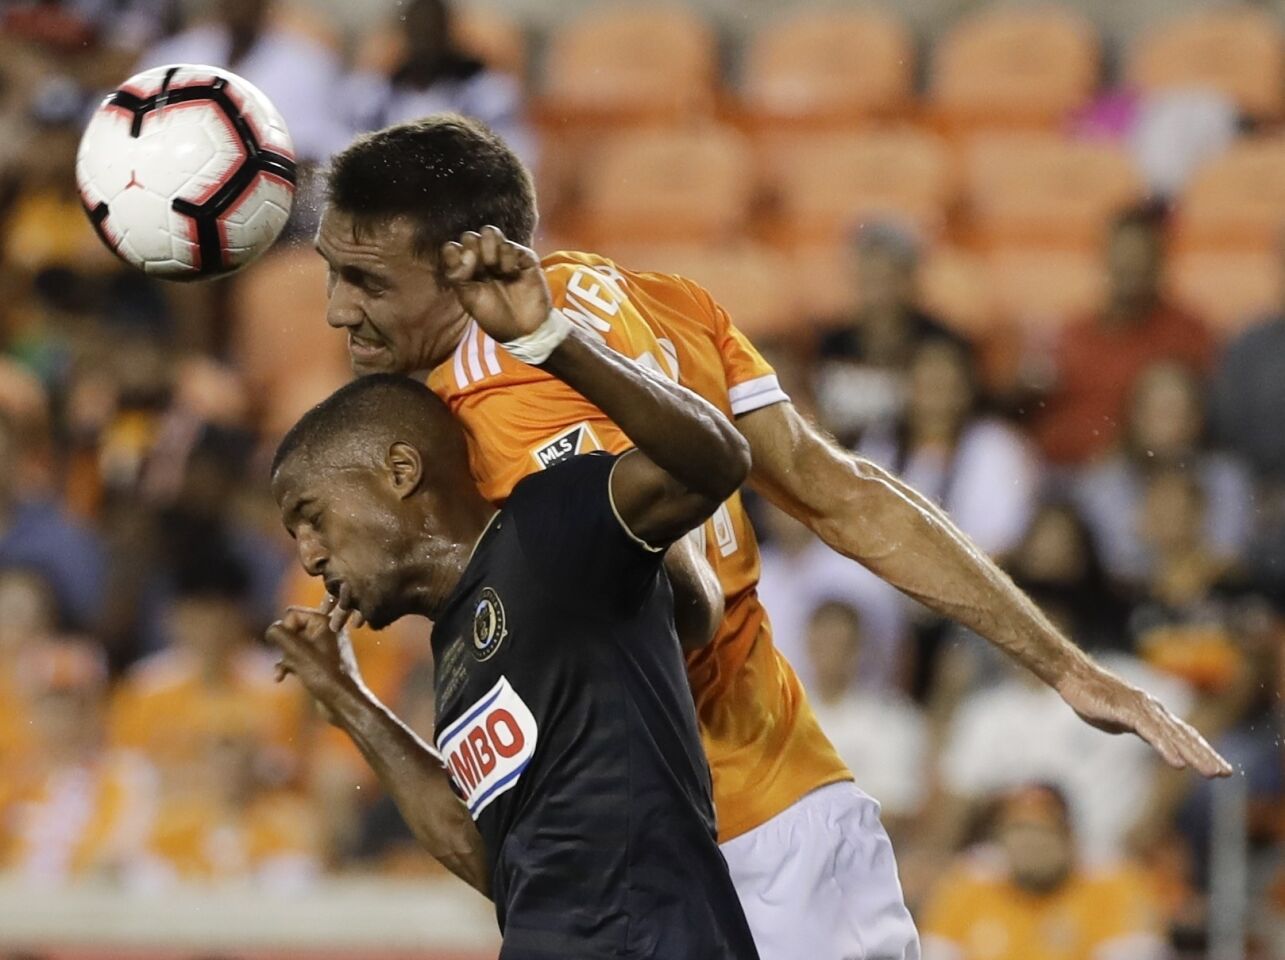 Philadelphia Union's Fafa Picault and Houston Dynamo's Andrew Wenger battle for a shot during the first half of the U.S. Open Cup championship soccer match Wednesday, Sept. 26, 2018, in Houston. (AP Photo/David J. Phillip)